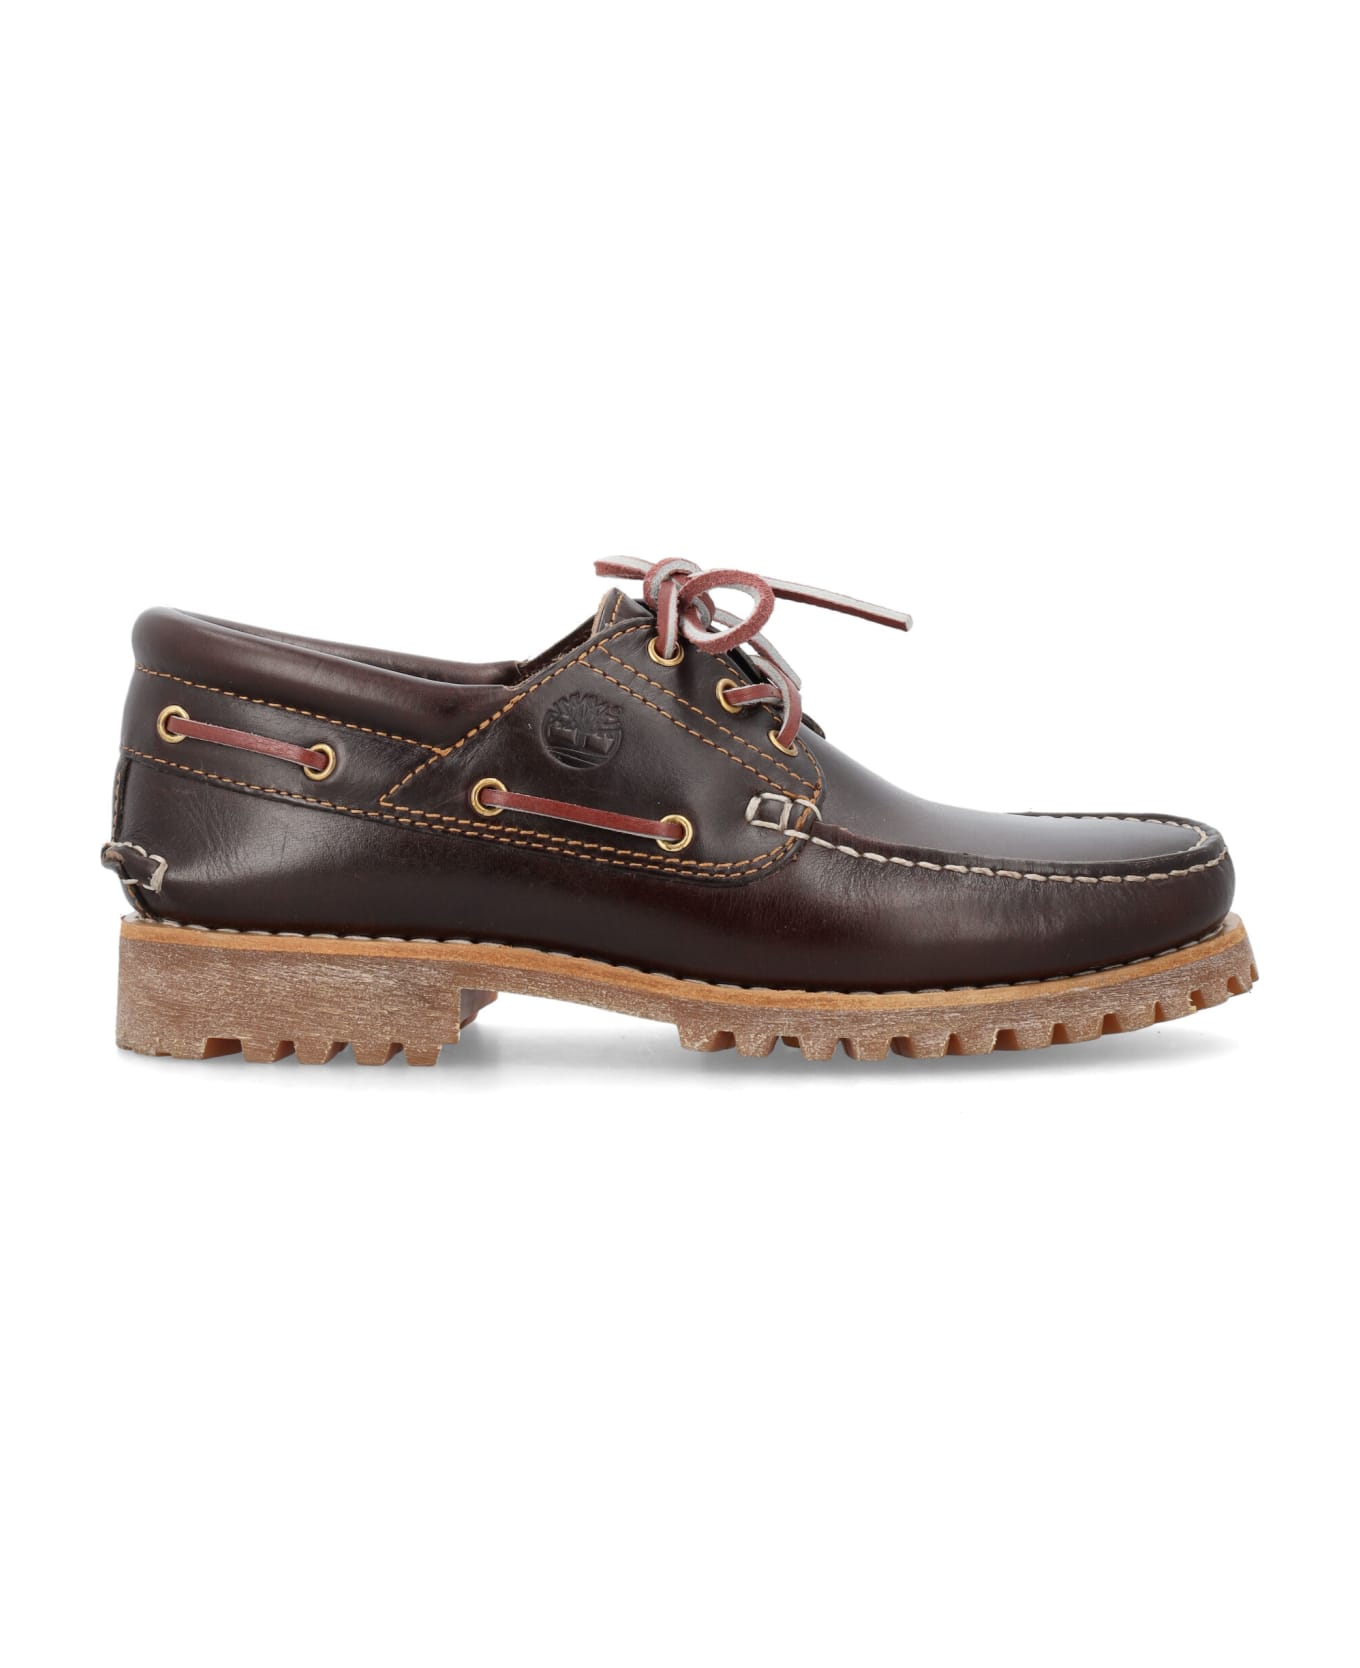 Timberland Classic Hand-sewn Boat Shoe - BROWN